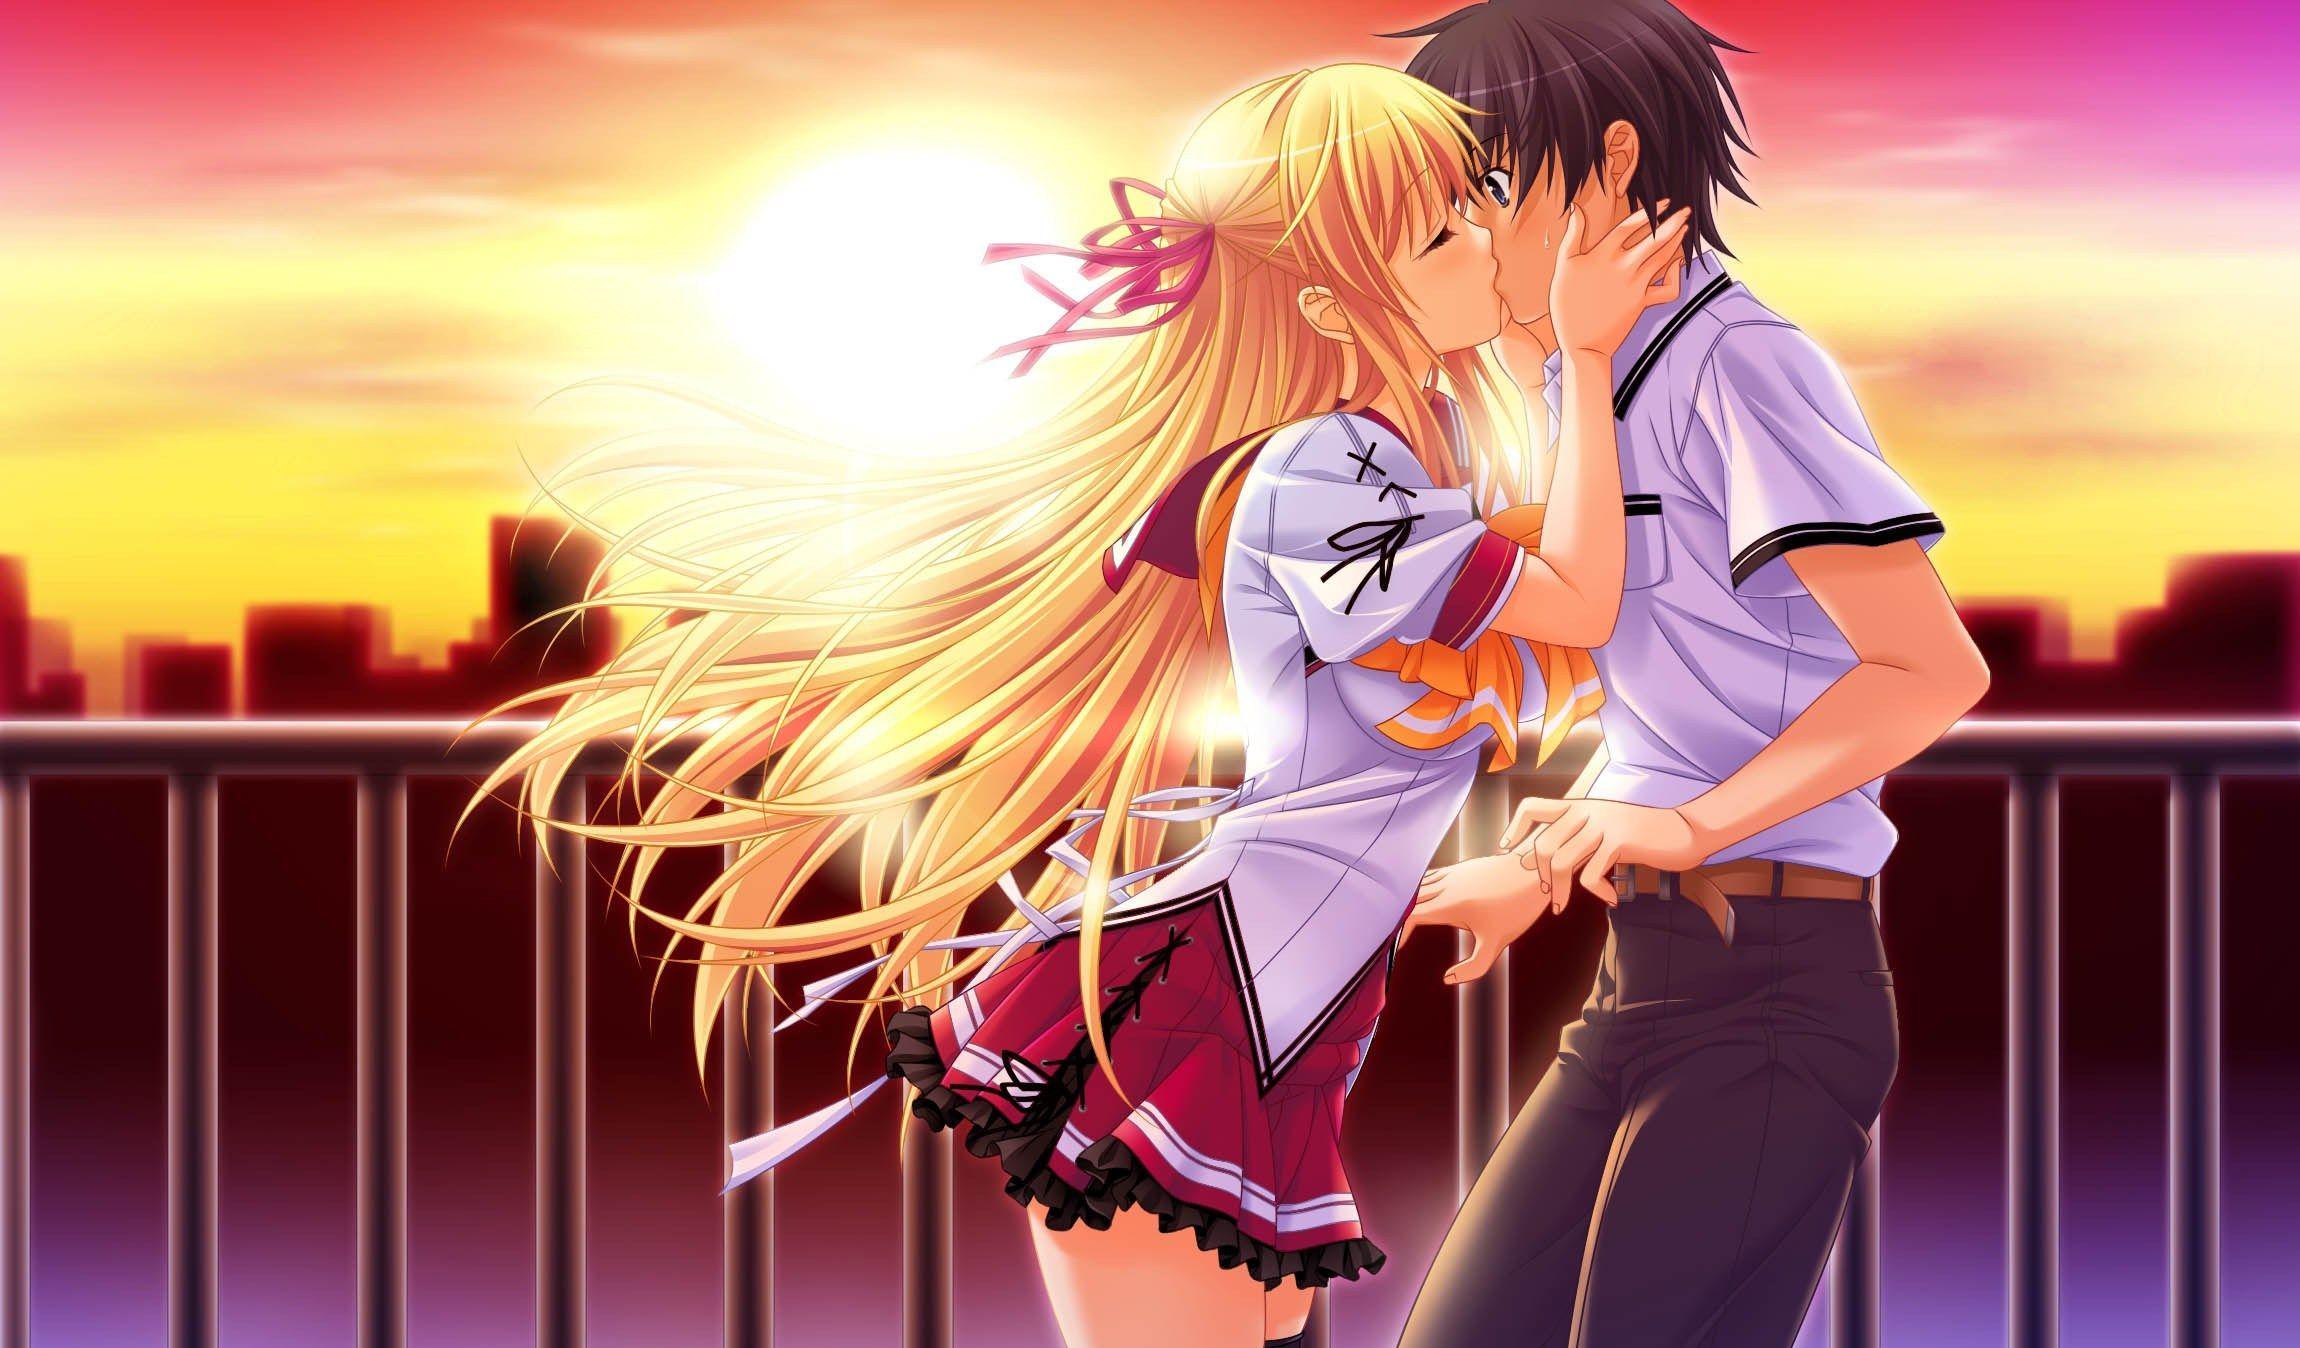 Anime Girl And Boy Kiss Valentines Day Wallpapers - Wallpaper Cave